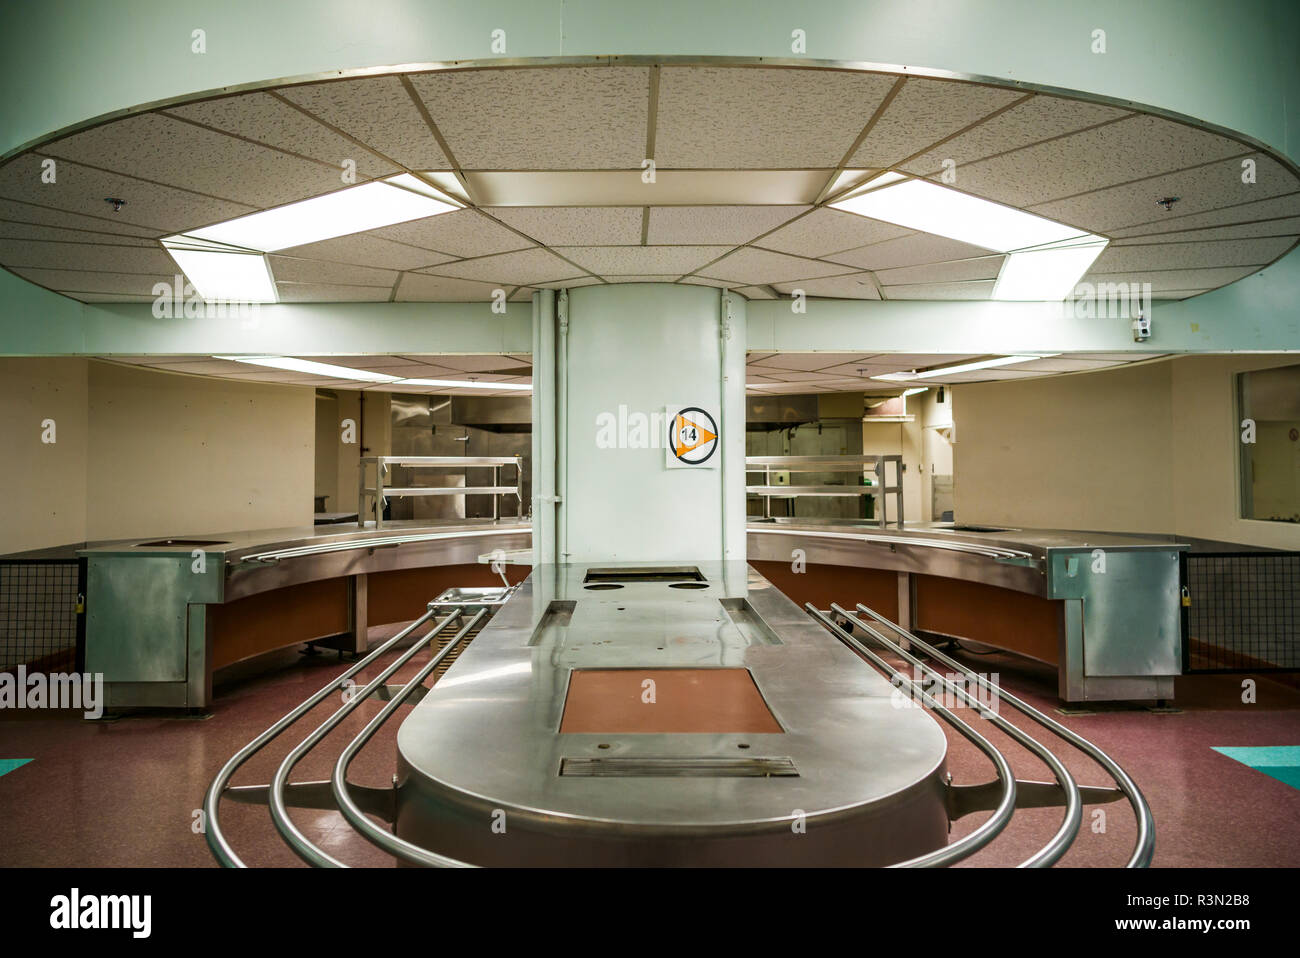 Canada, Ontario, Carp, Diefenbunker, Canadian Cold War Museum in underground bunker, bunker kitchen and dining hall Stock Photo